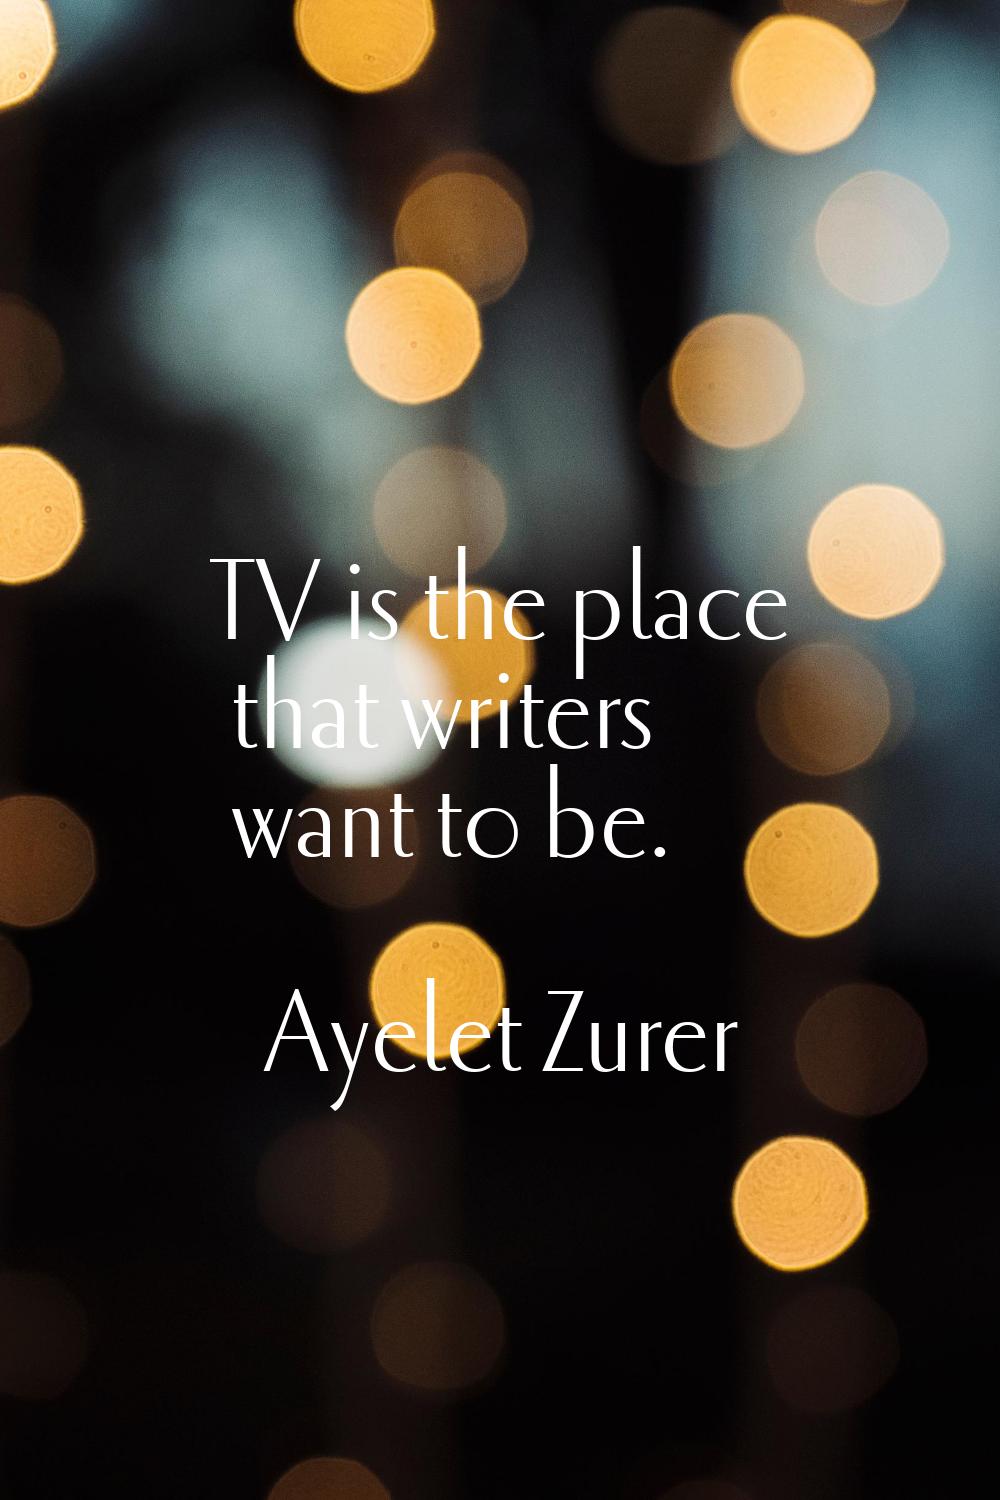 TV is the place that writers want to be.